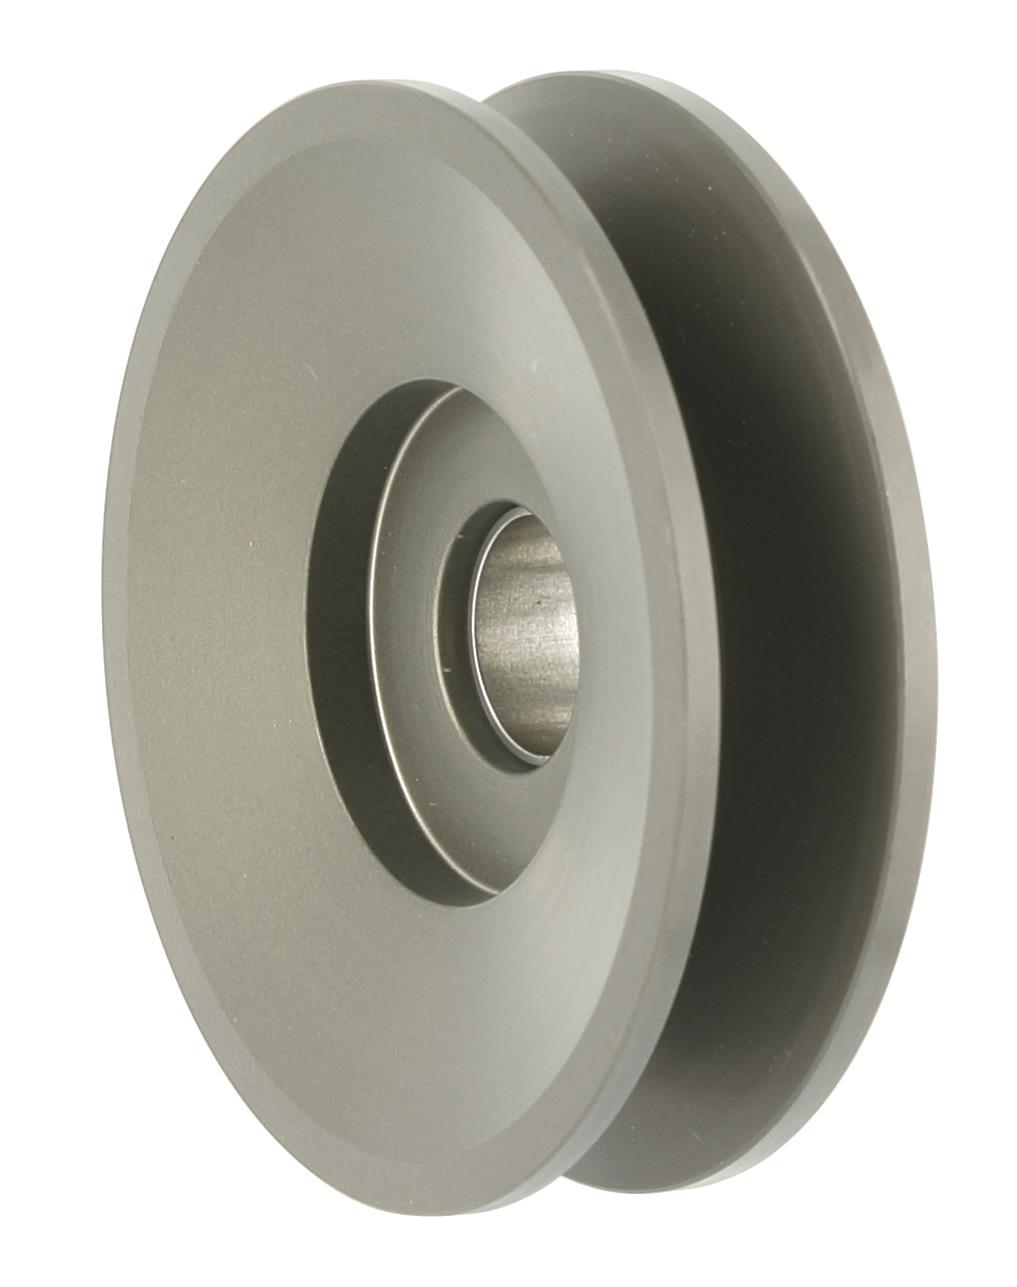 Powermaster Performance 186 Yellow Zinc 65mm OD Pulley 6 Groove 